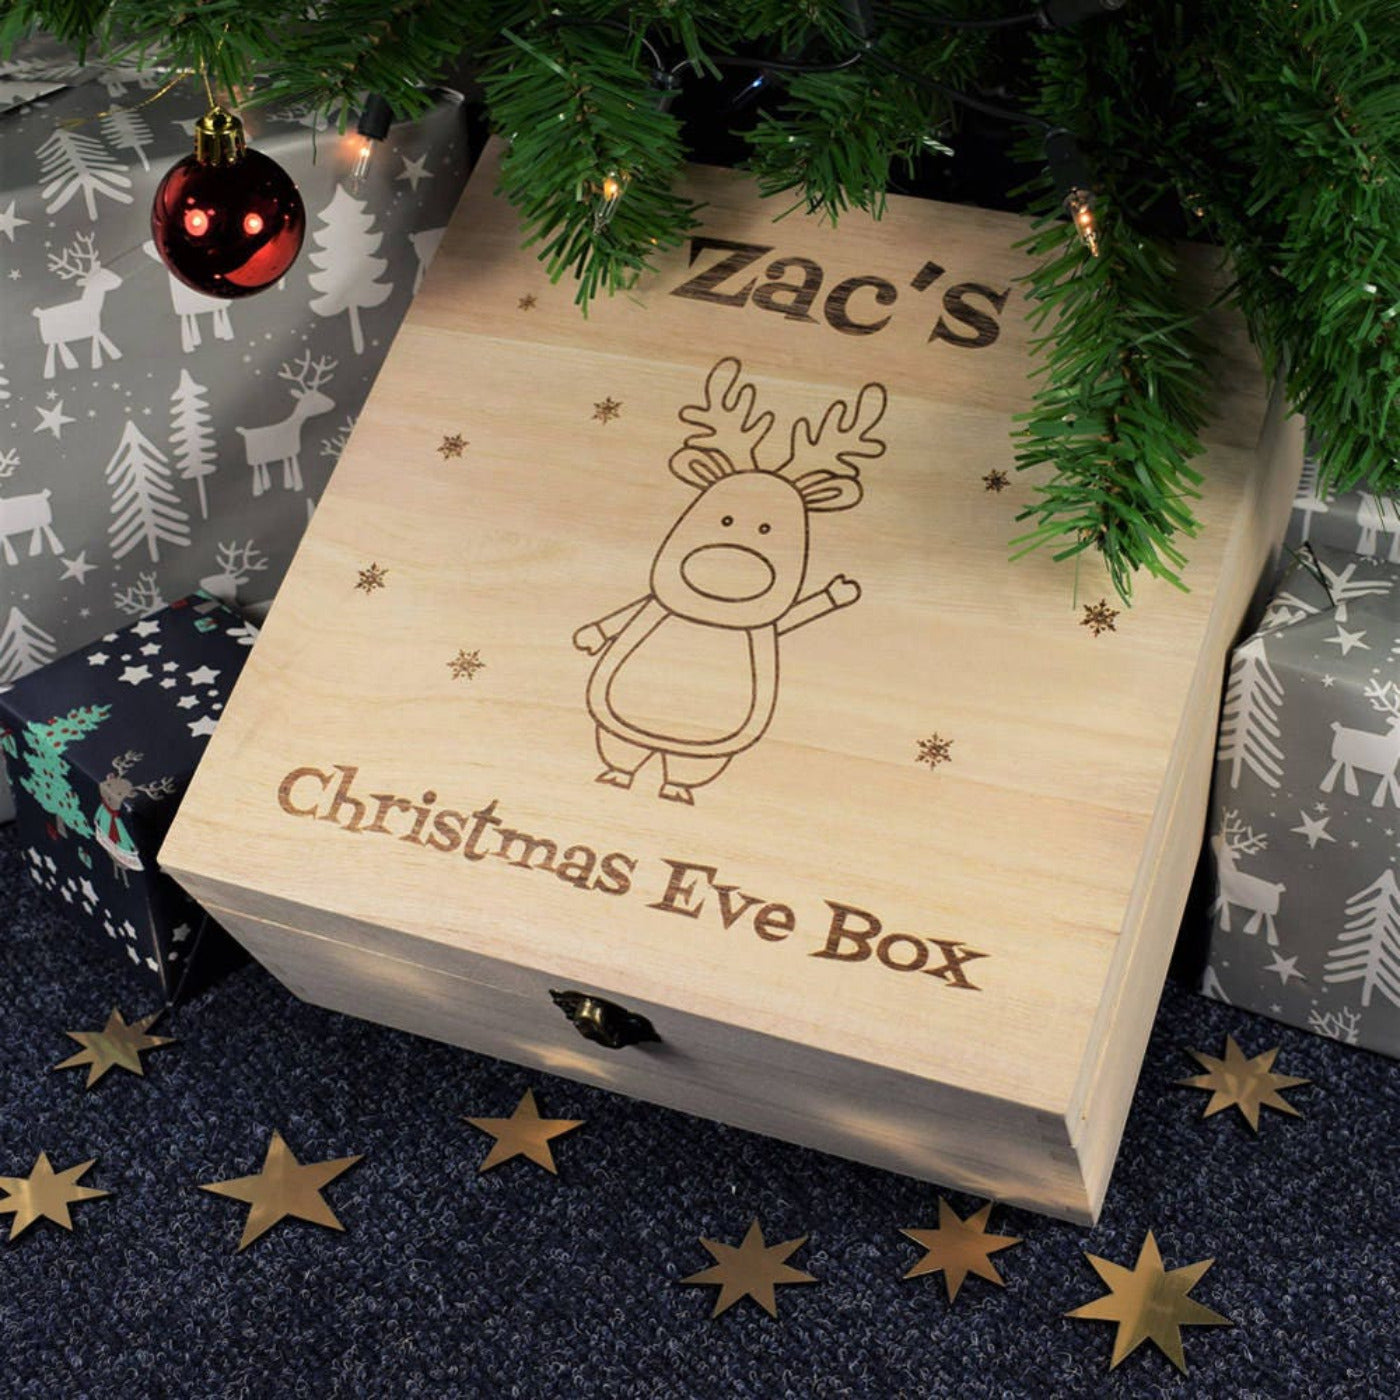 Personalised, Engraved Wooden Christmas Eve Box - Rudolph the Reindeer